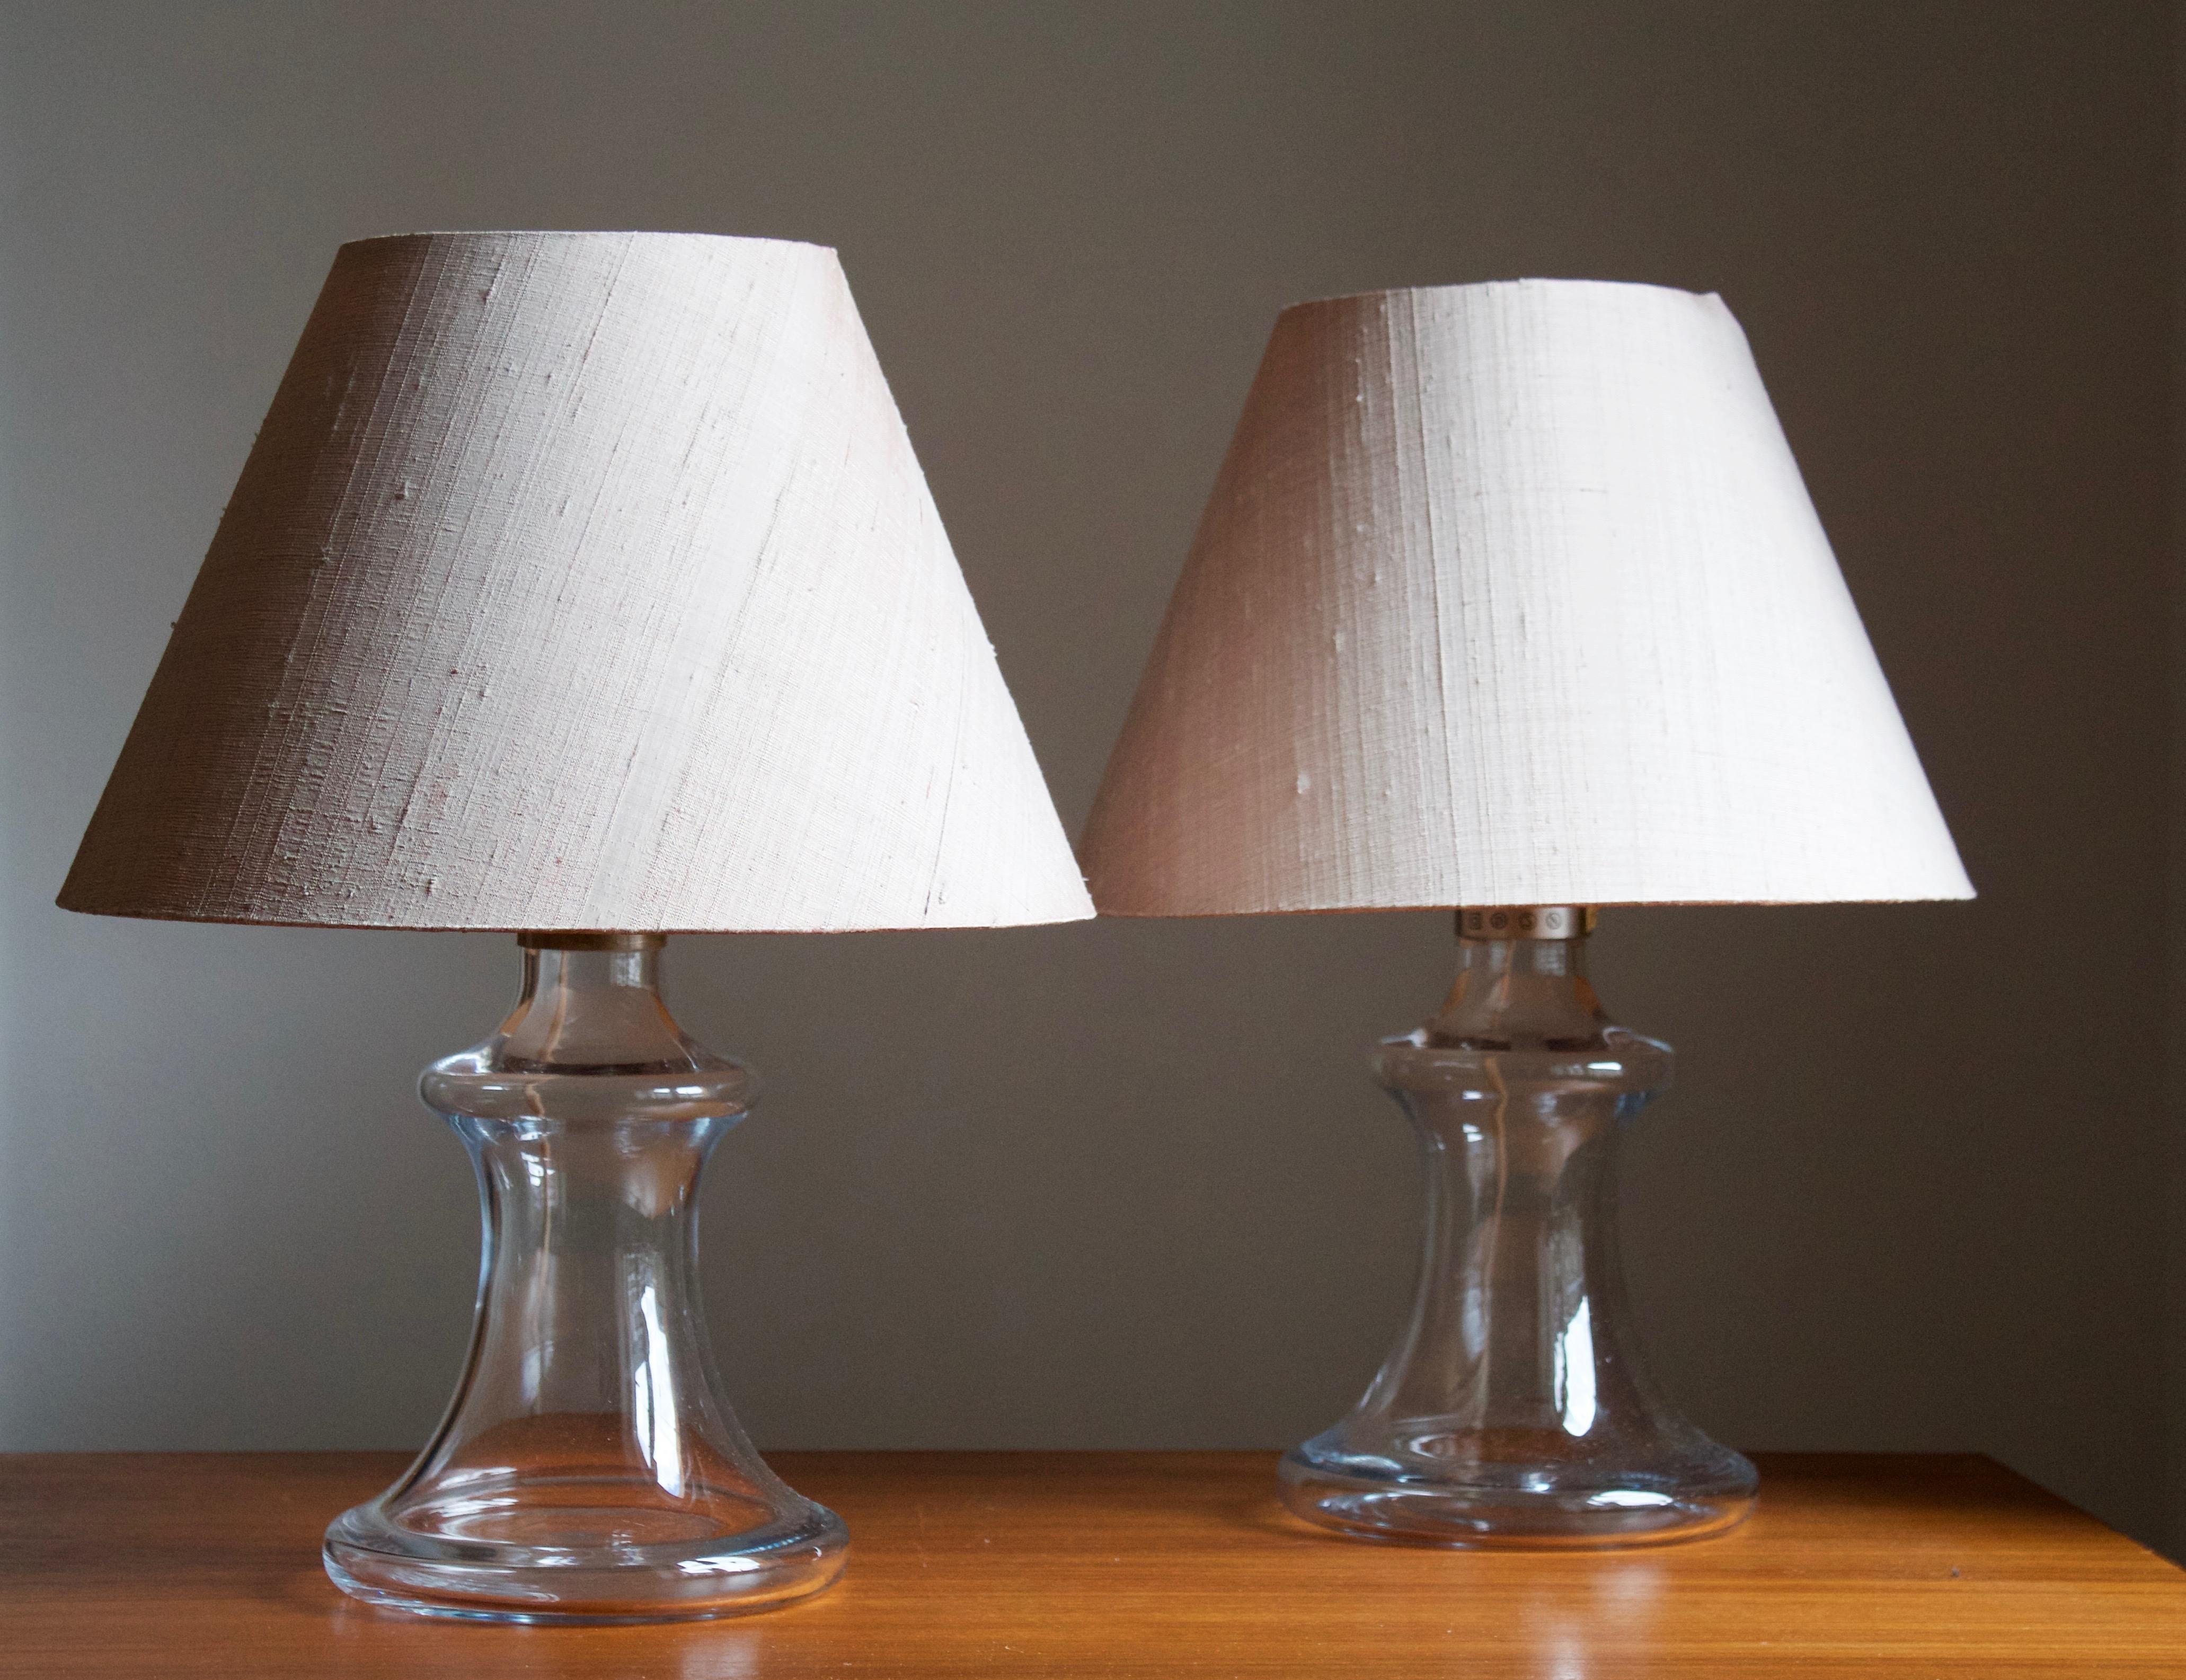 A pair of table lamps, designed by Michael Bang for Holmegaard Glasværk, 1978. Labeled. Original lampshades. Nickel-plated metal and blown glass.

Pair sourced in Germany and likely produced for export. 

Stated dimensions exclude lampshades. Sold